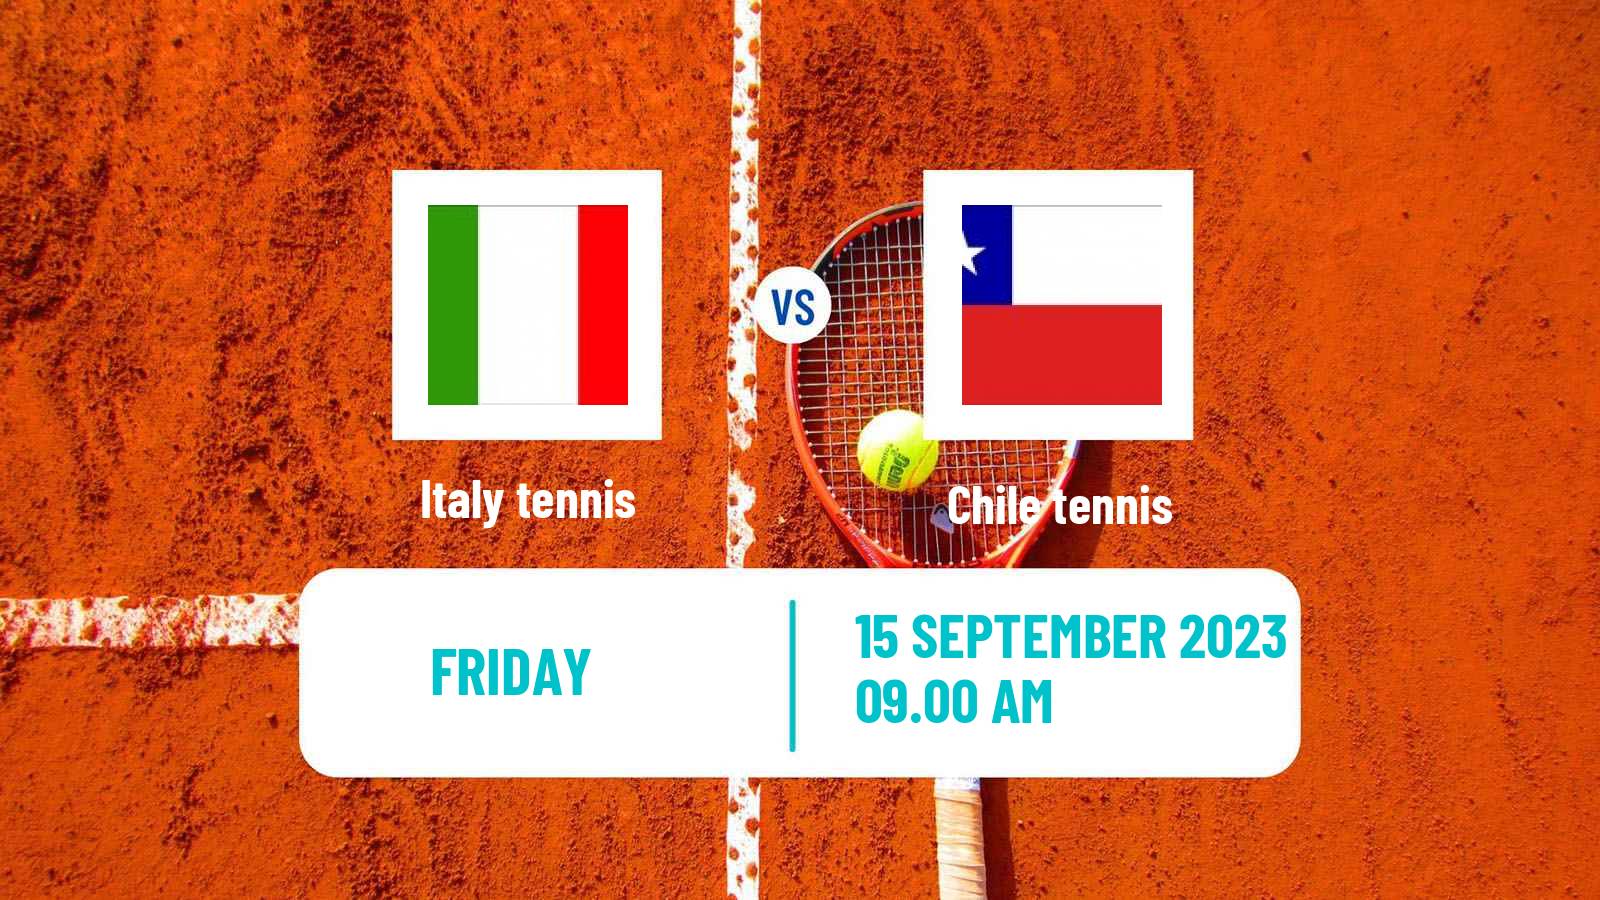 Tennis Davis Cup - World Group Teams Italy - Chile